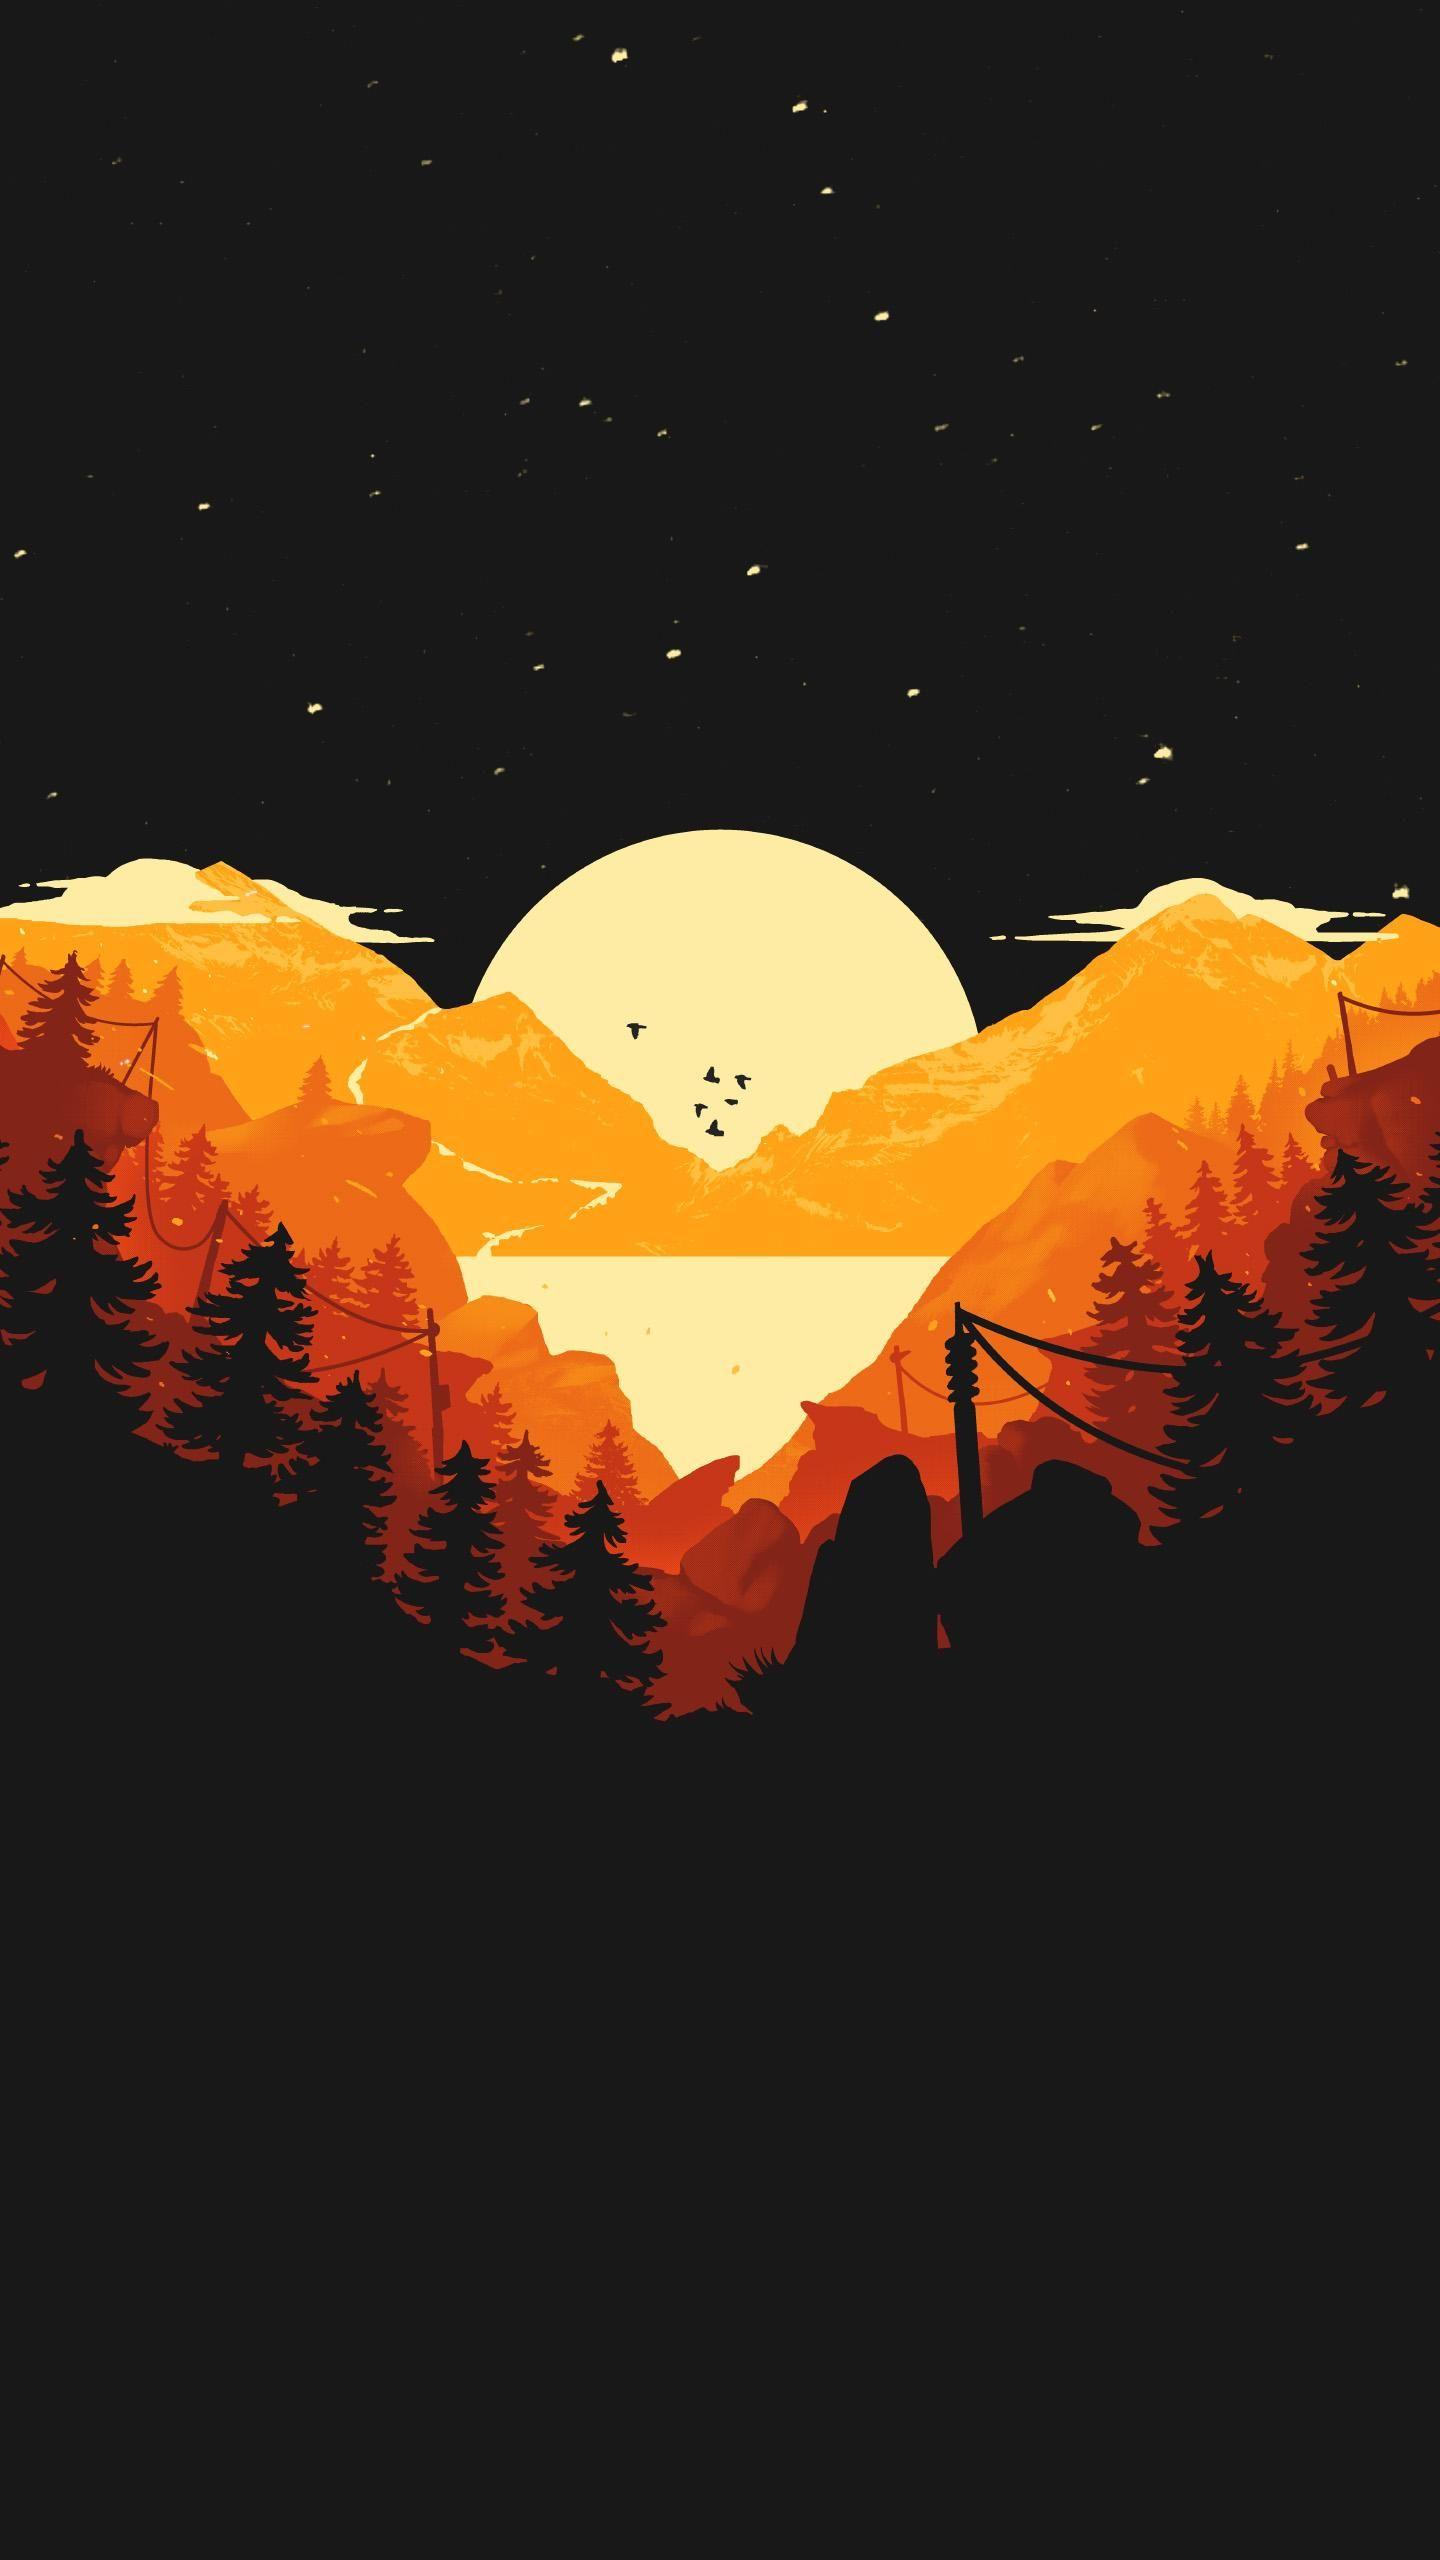 Can someone make the sky and the front trees bright? Sunset like